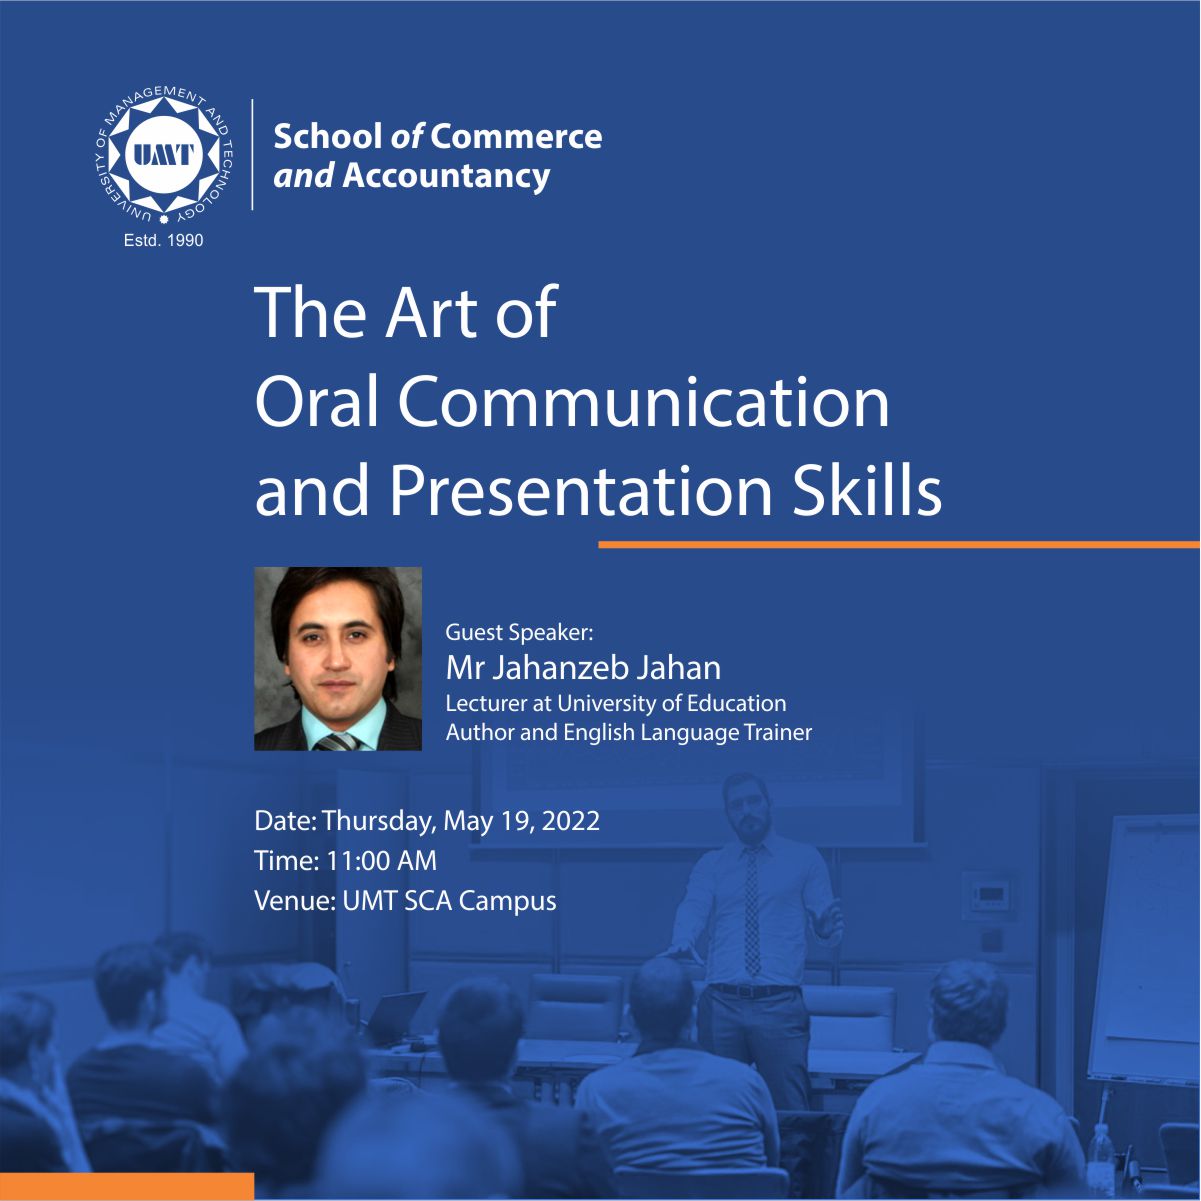 The Art of Oral Communication and Presentation Skills" by Mr. Jahanzeb Jahan.